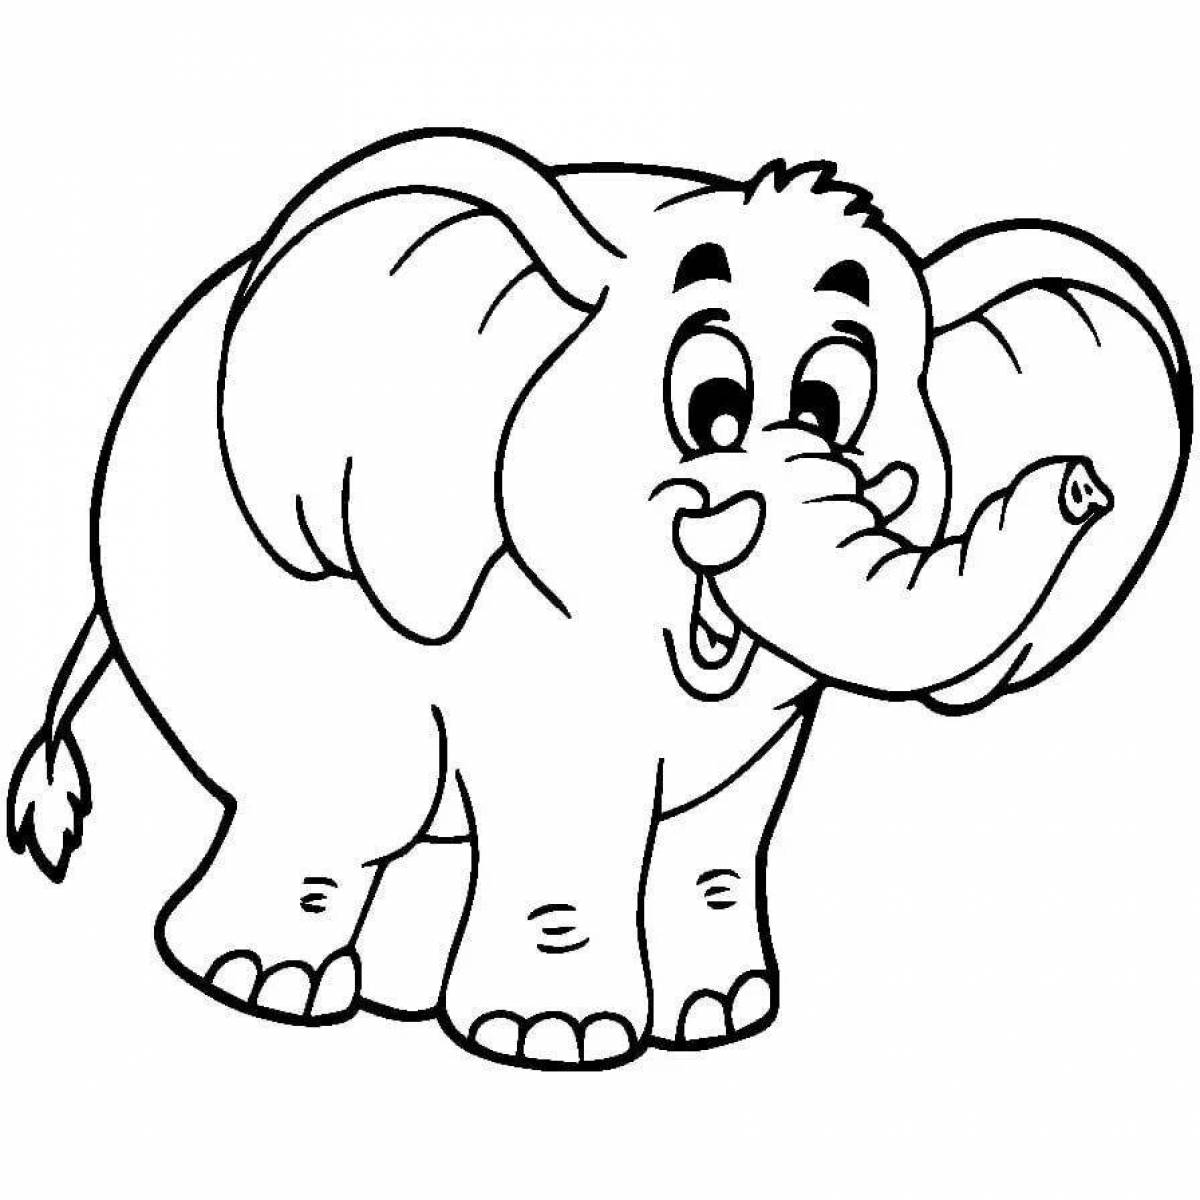 Fabulous elephant coloring book for 3-4 year olds